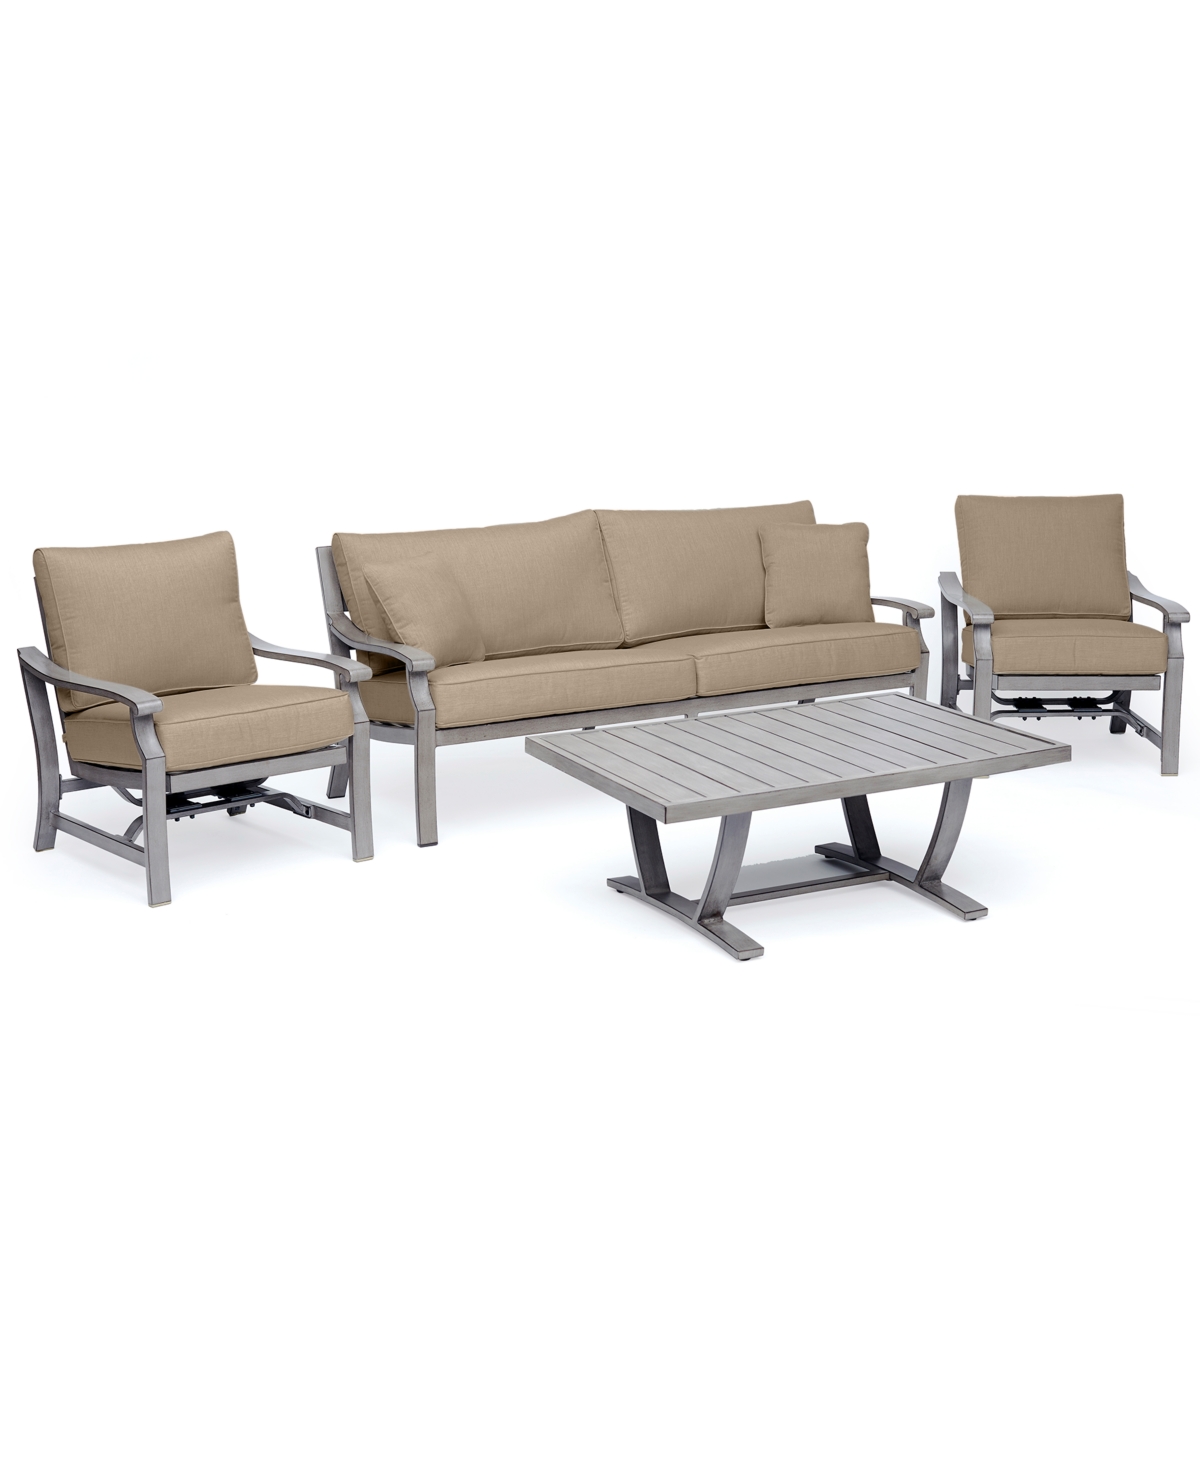 Agio Tara Aluminum Outdoor 4-pc. Seating Set (1 Sofa, 2 Rocker Chairs & 1 Coffee Table), Created For Macy In Outdura Remy Pebble